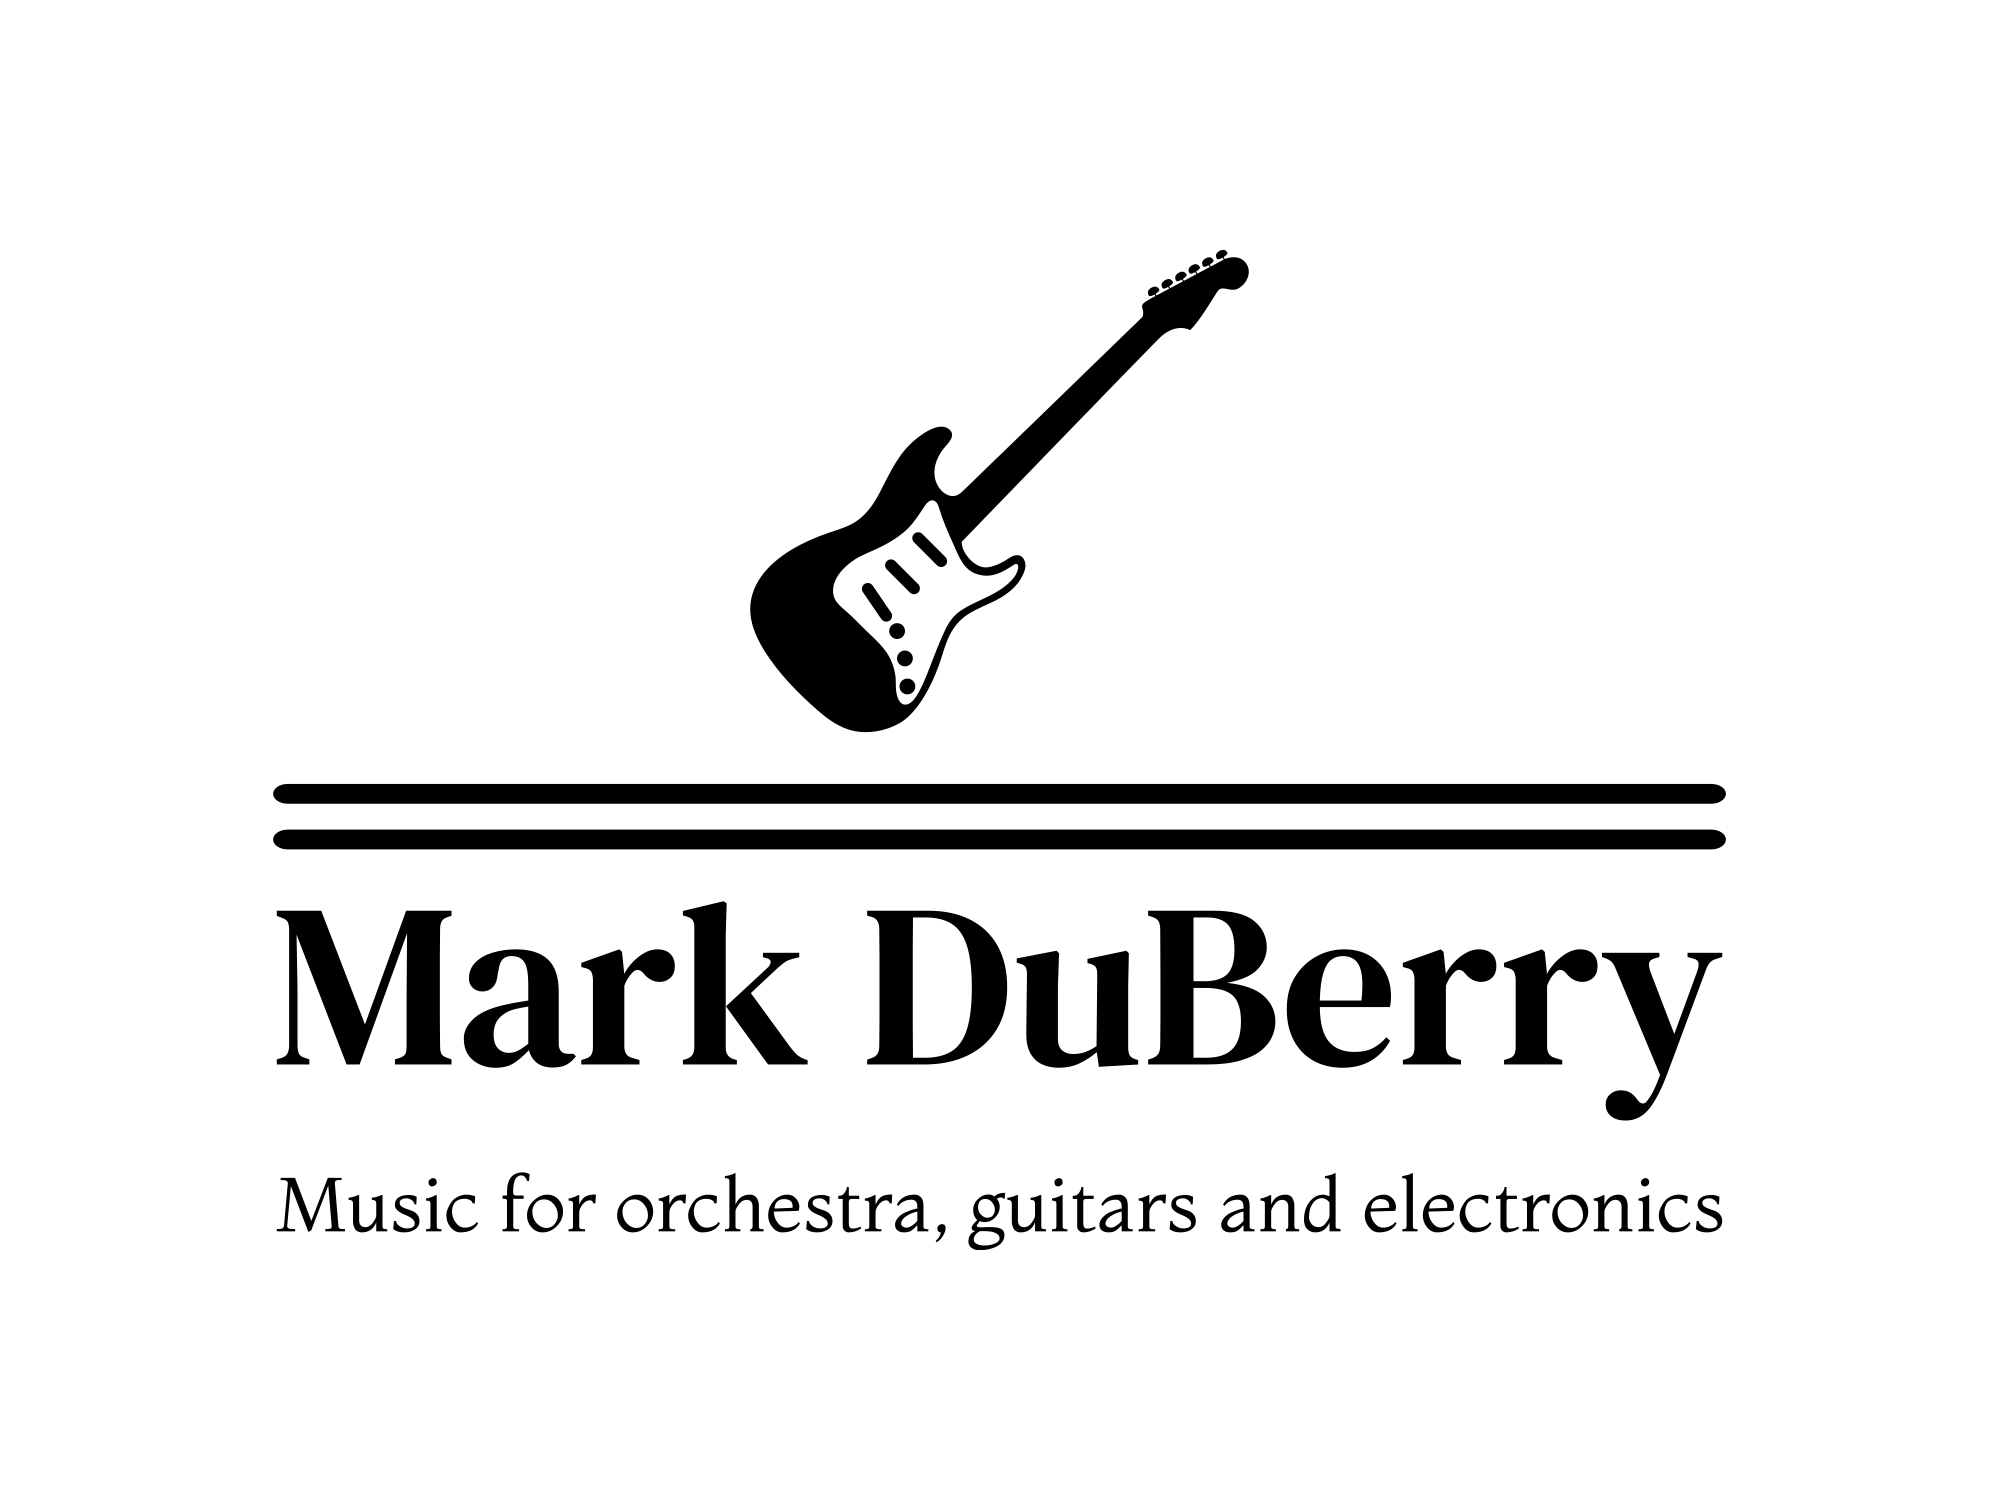 Mark DuBerry Composer and Guitarist